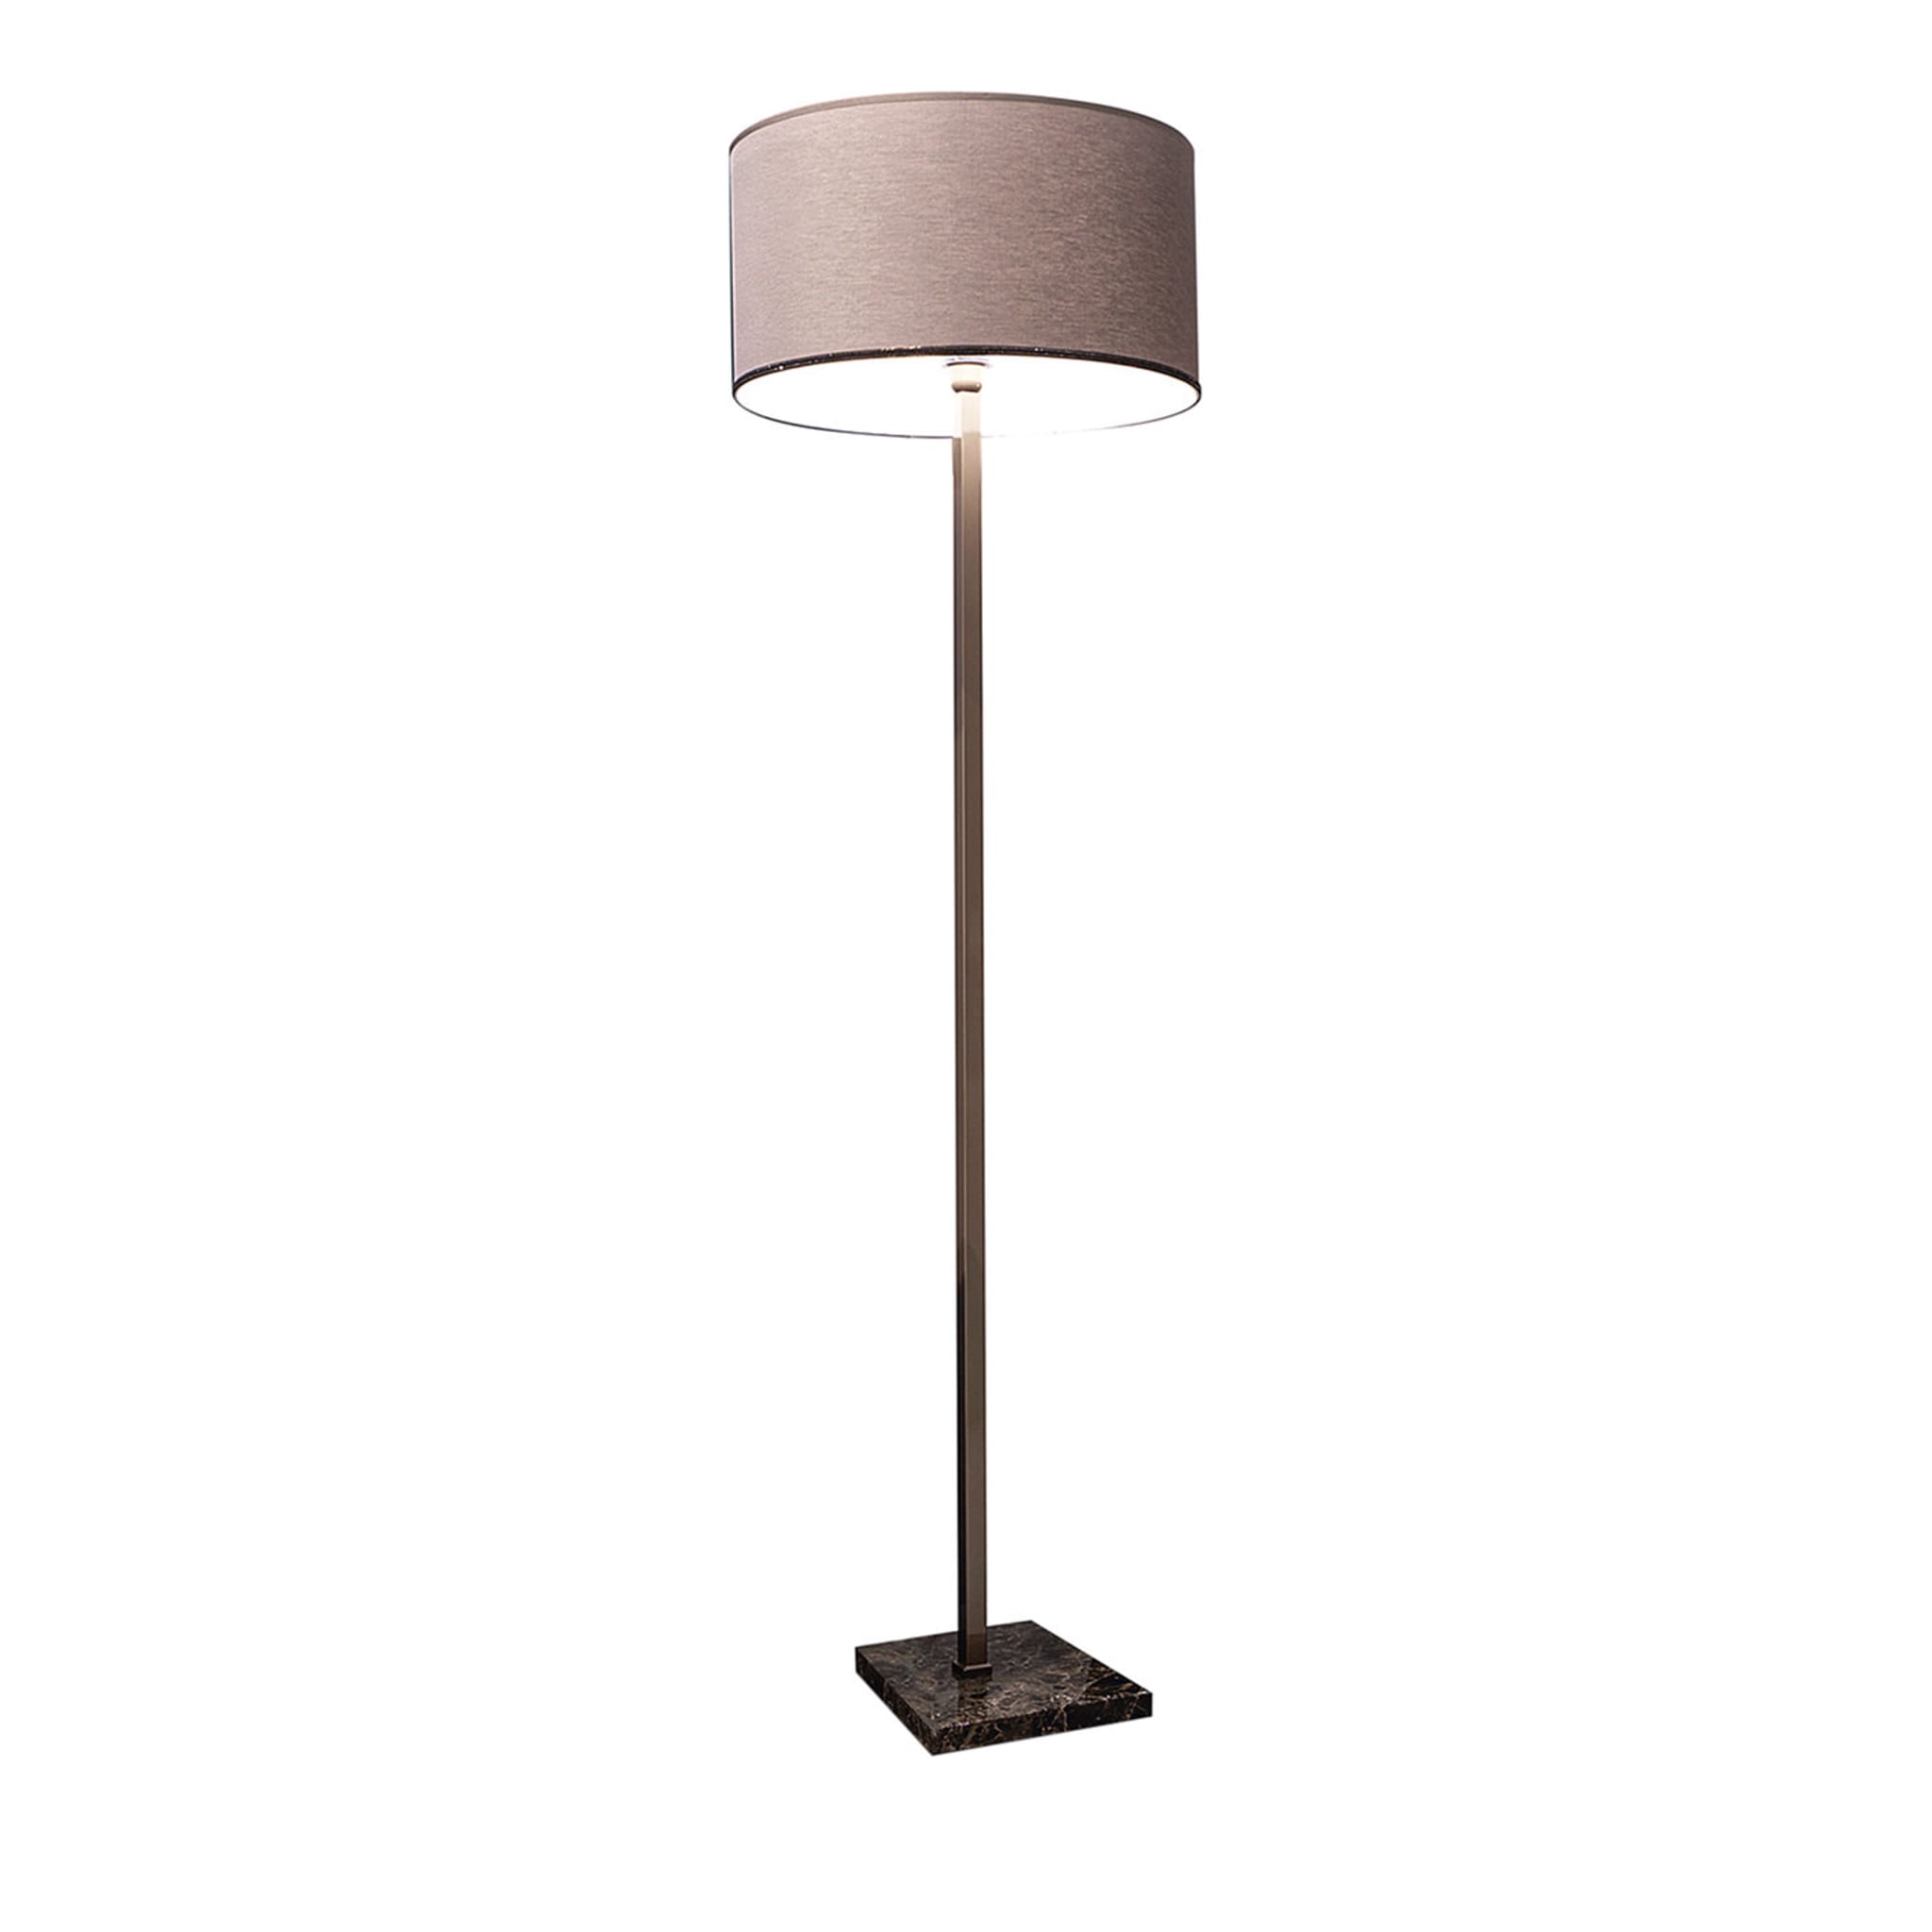 Keope Drum Floor Lamp with Marble Base - Main view